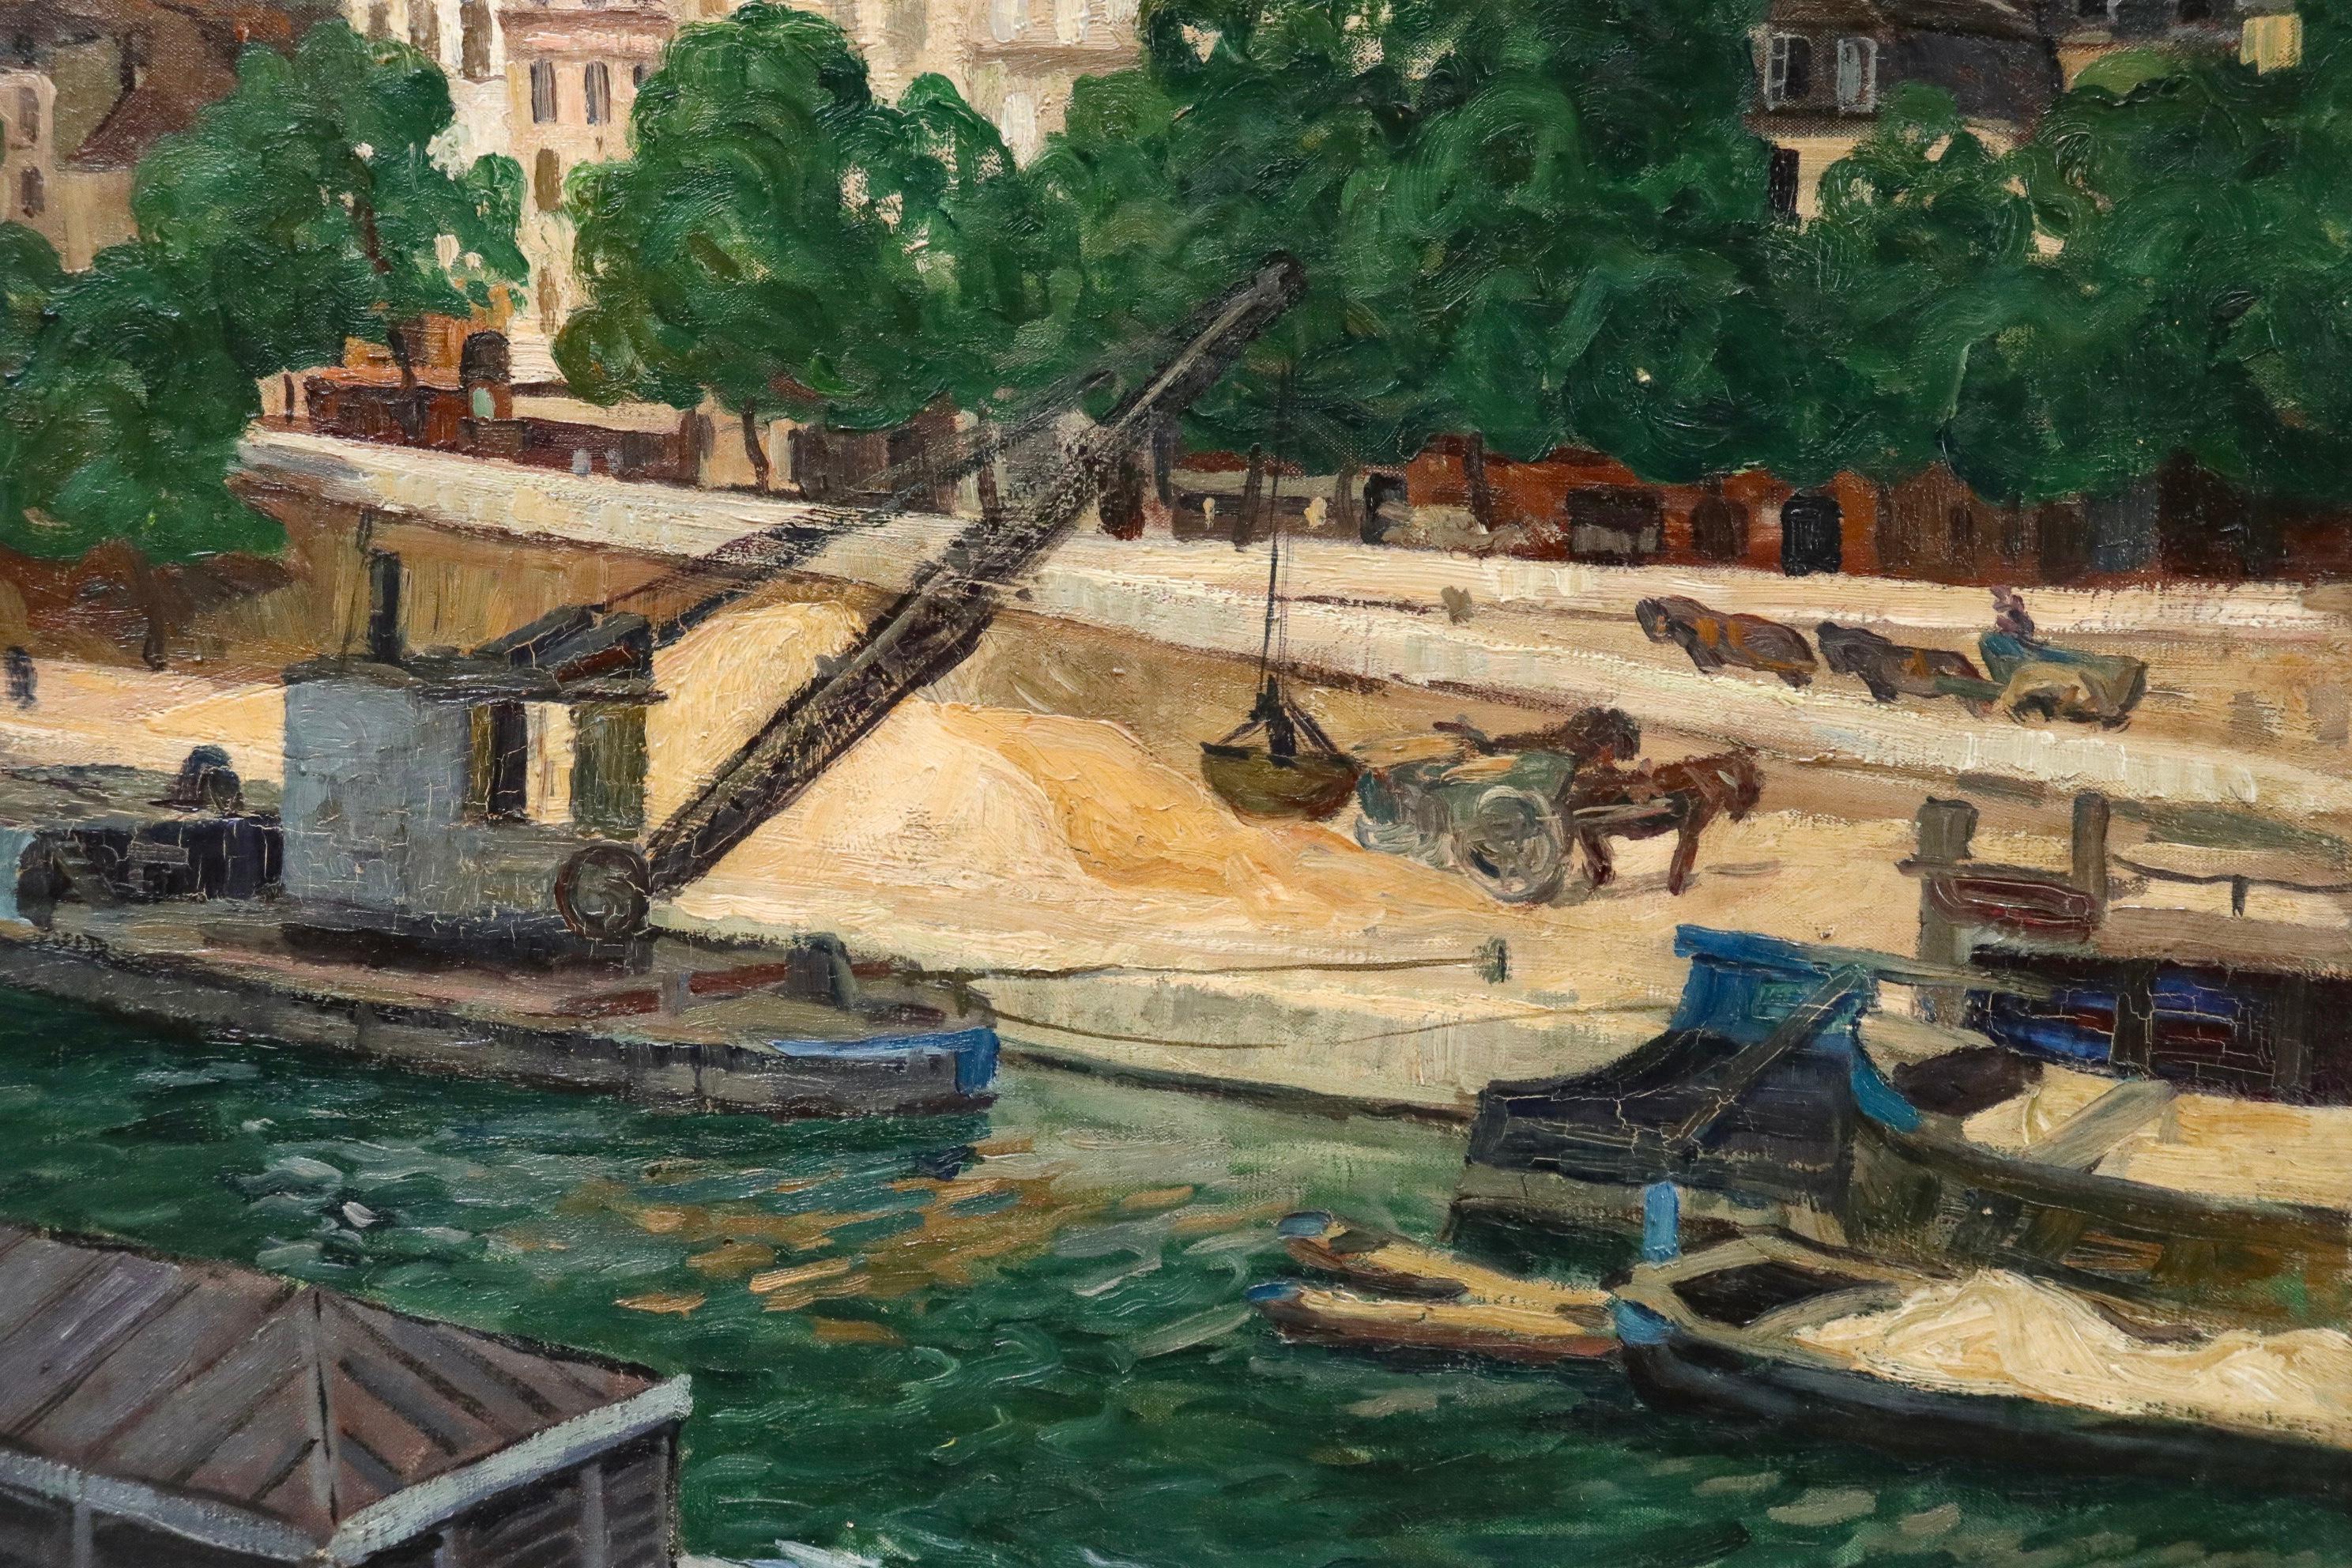 Workers on the Seine - Post Louis-Philippe - River Landscape Oil by G Balande 2